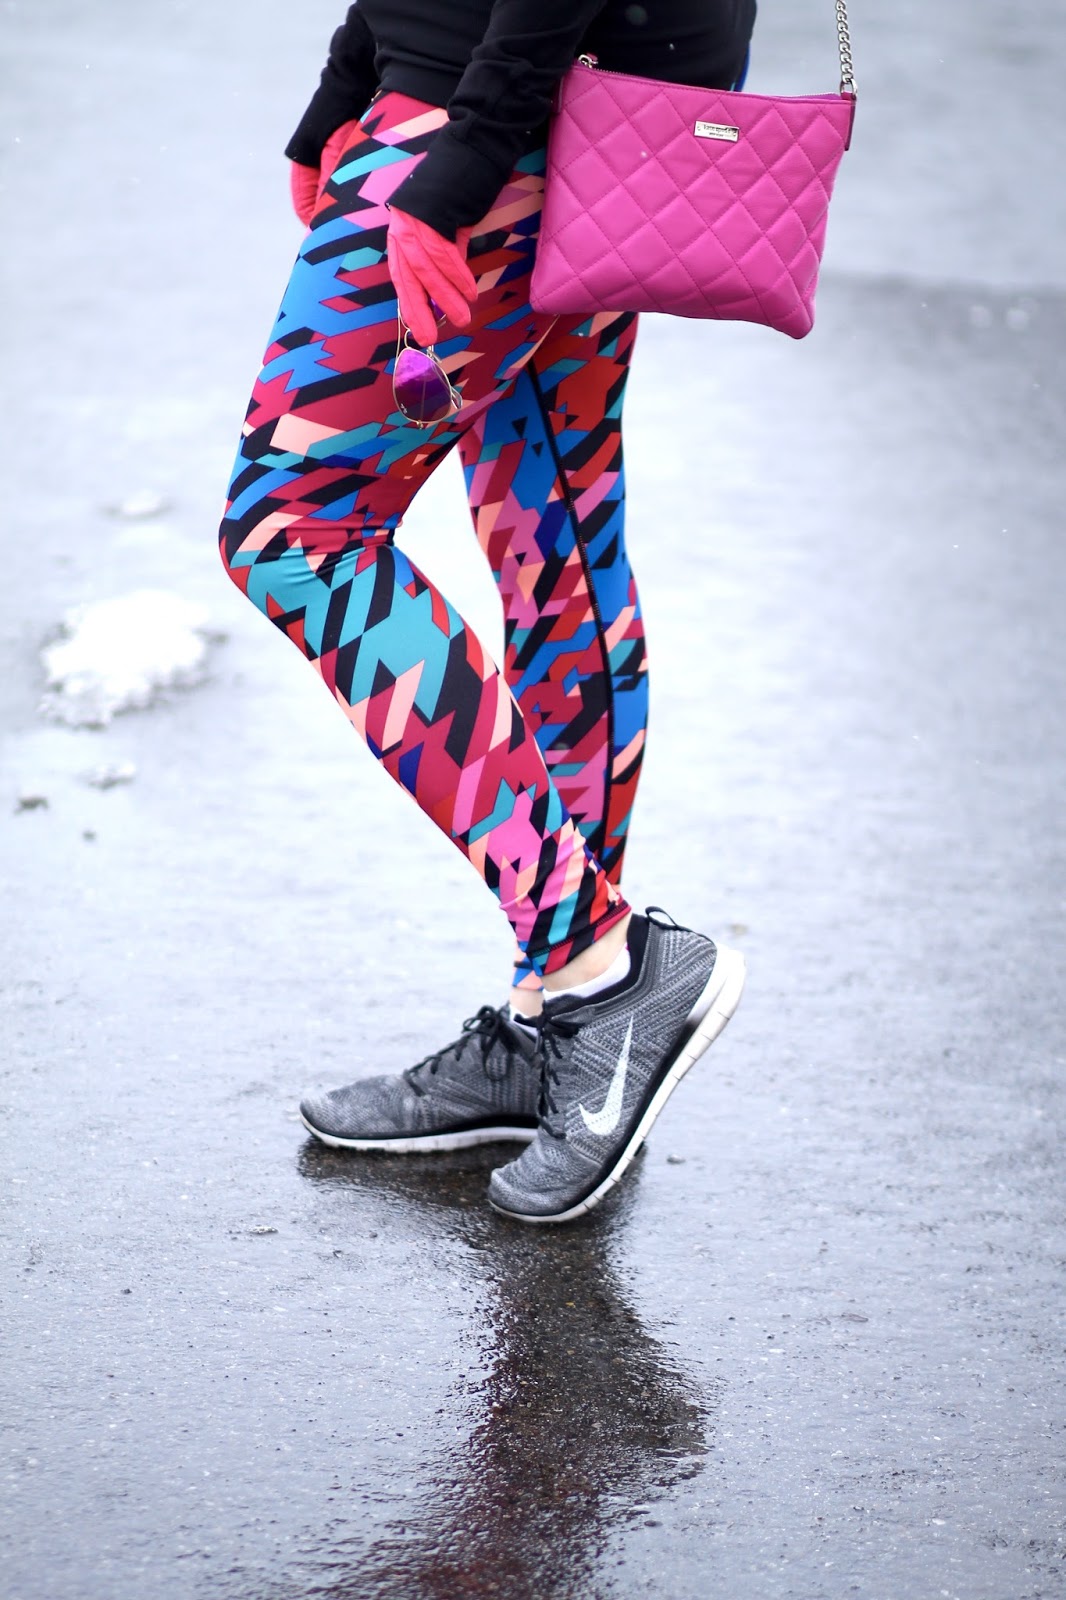 Nordstrom workout leggings from zella in fun patterns and prints, kate spade pink bag, purse, pink raybans, and nike flyknit free